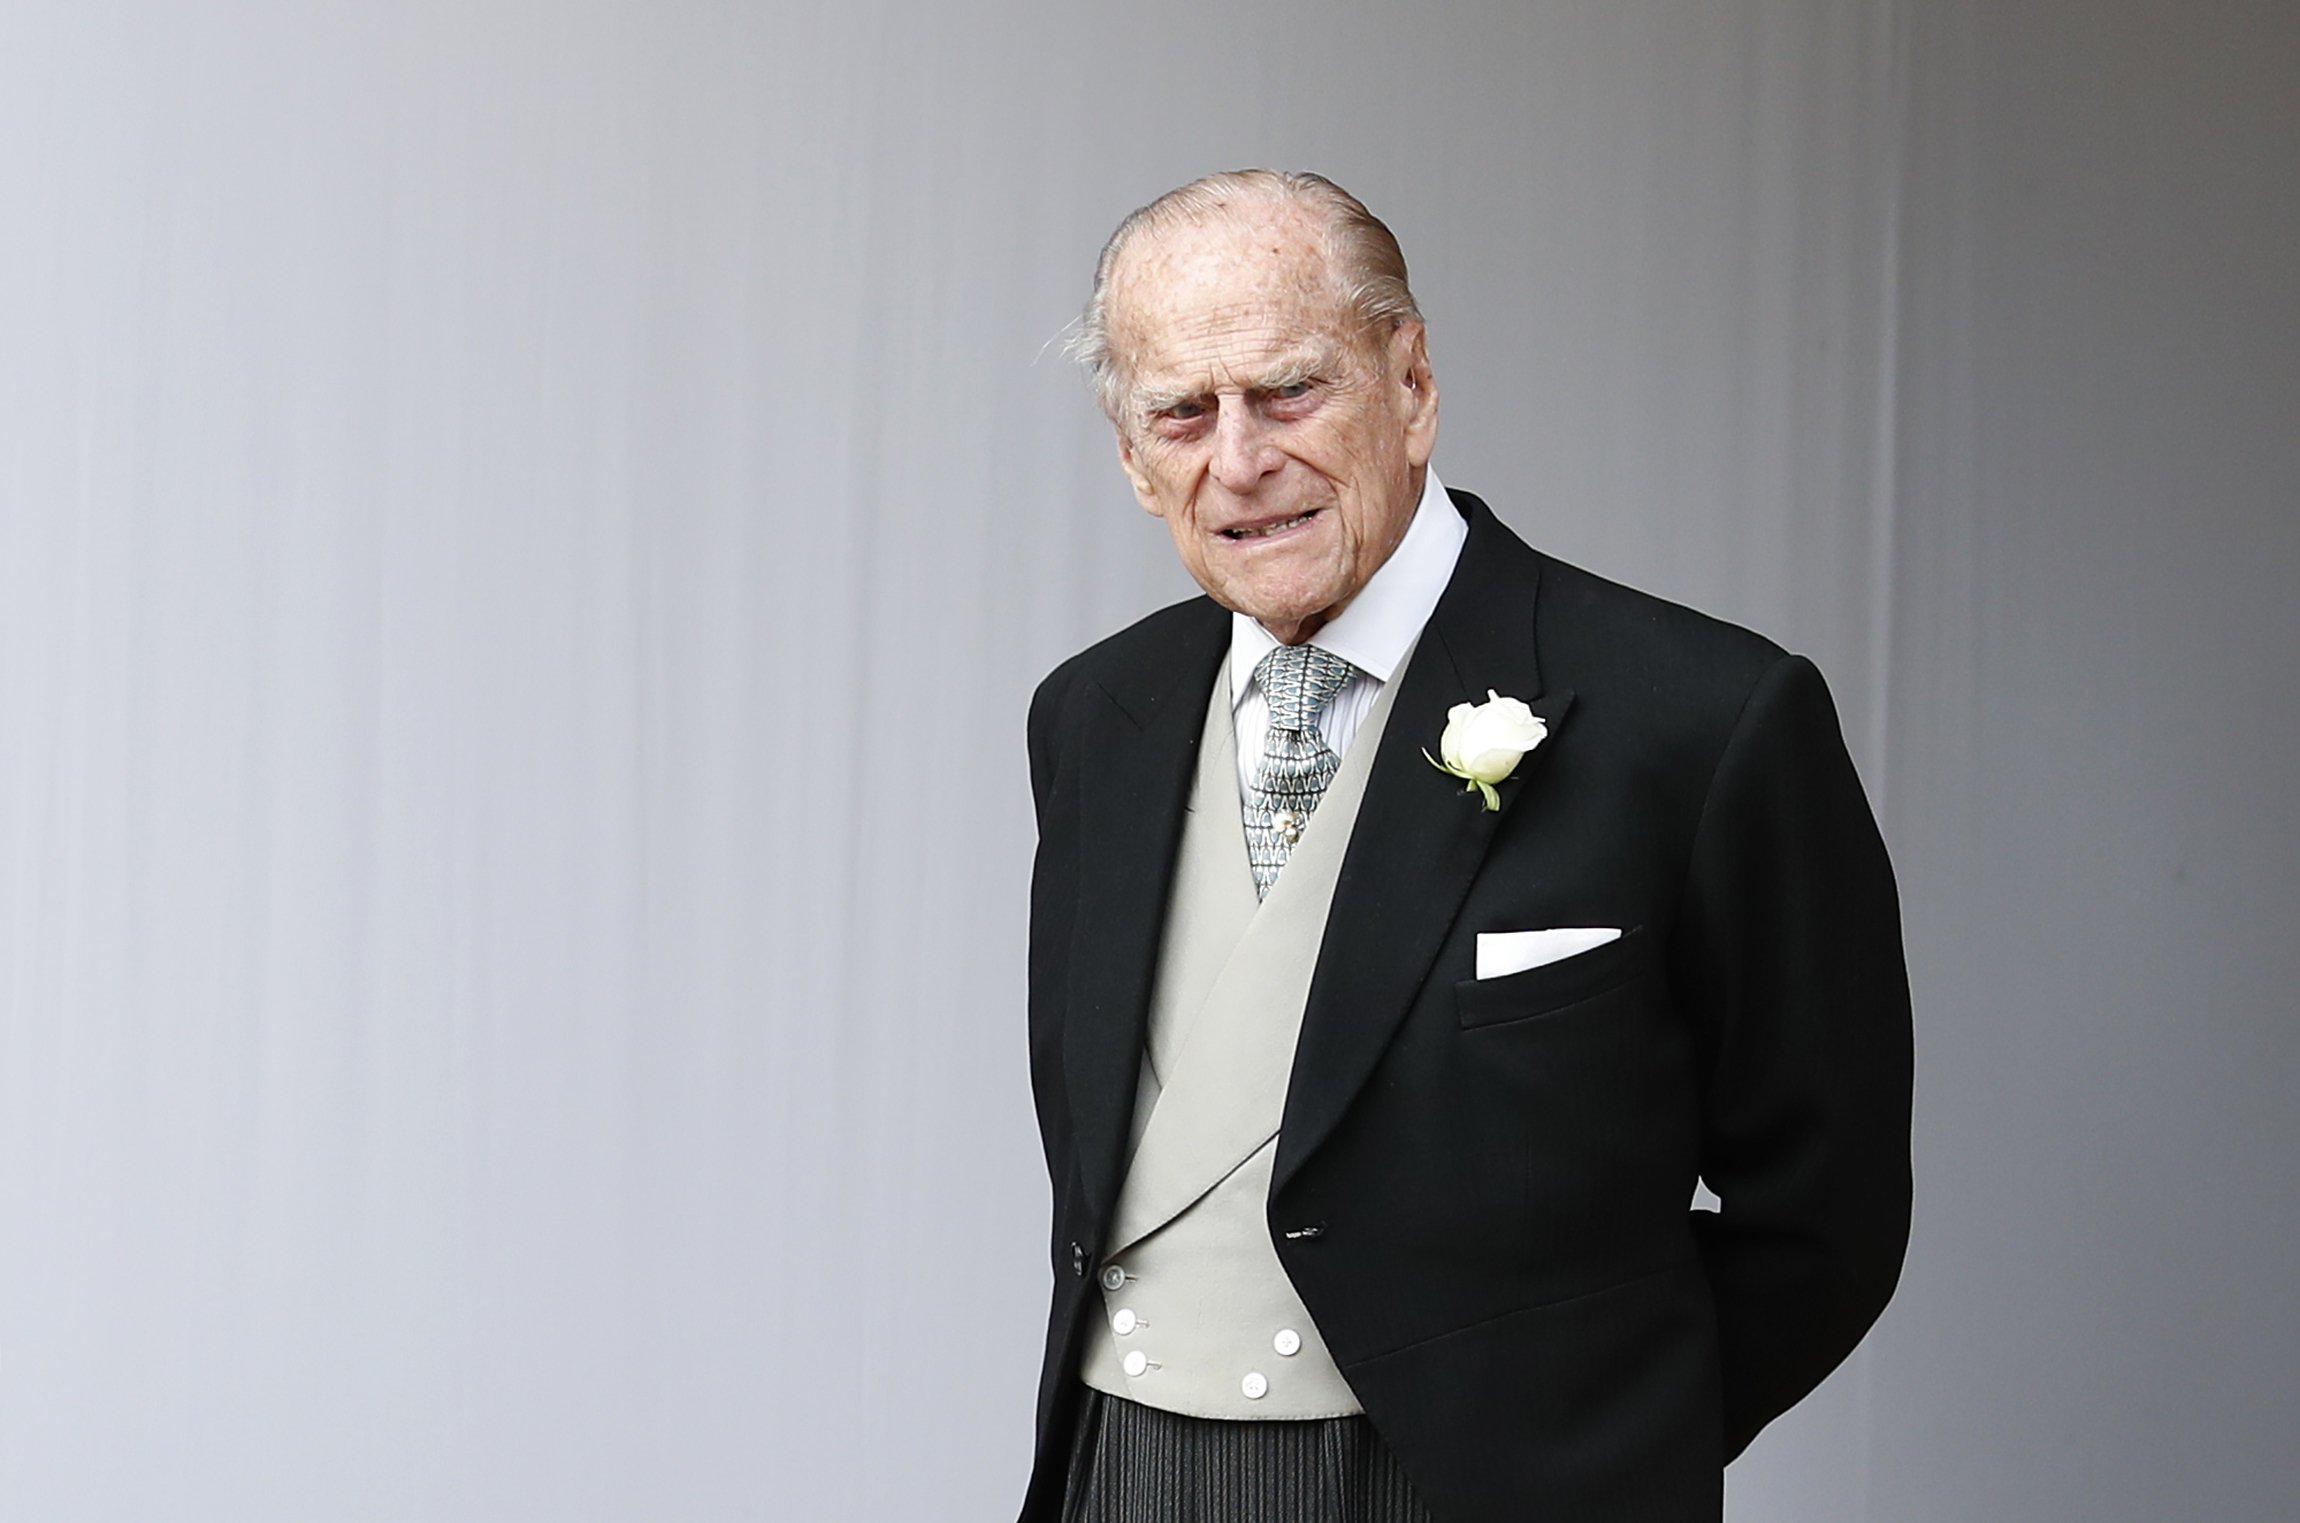 Prince Philip attends the wedding of Princess Eugenie of York to Jack Brooksbank at St. George's Chapel on October 12, 2018 in Windsor, England | Photo: Getty Images